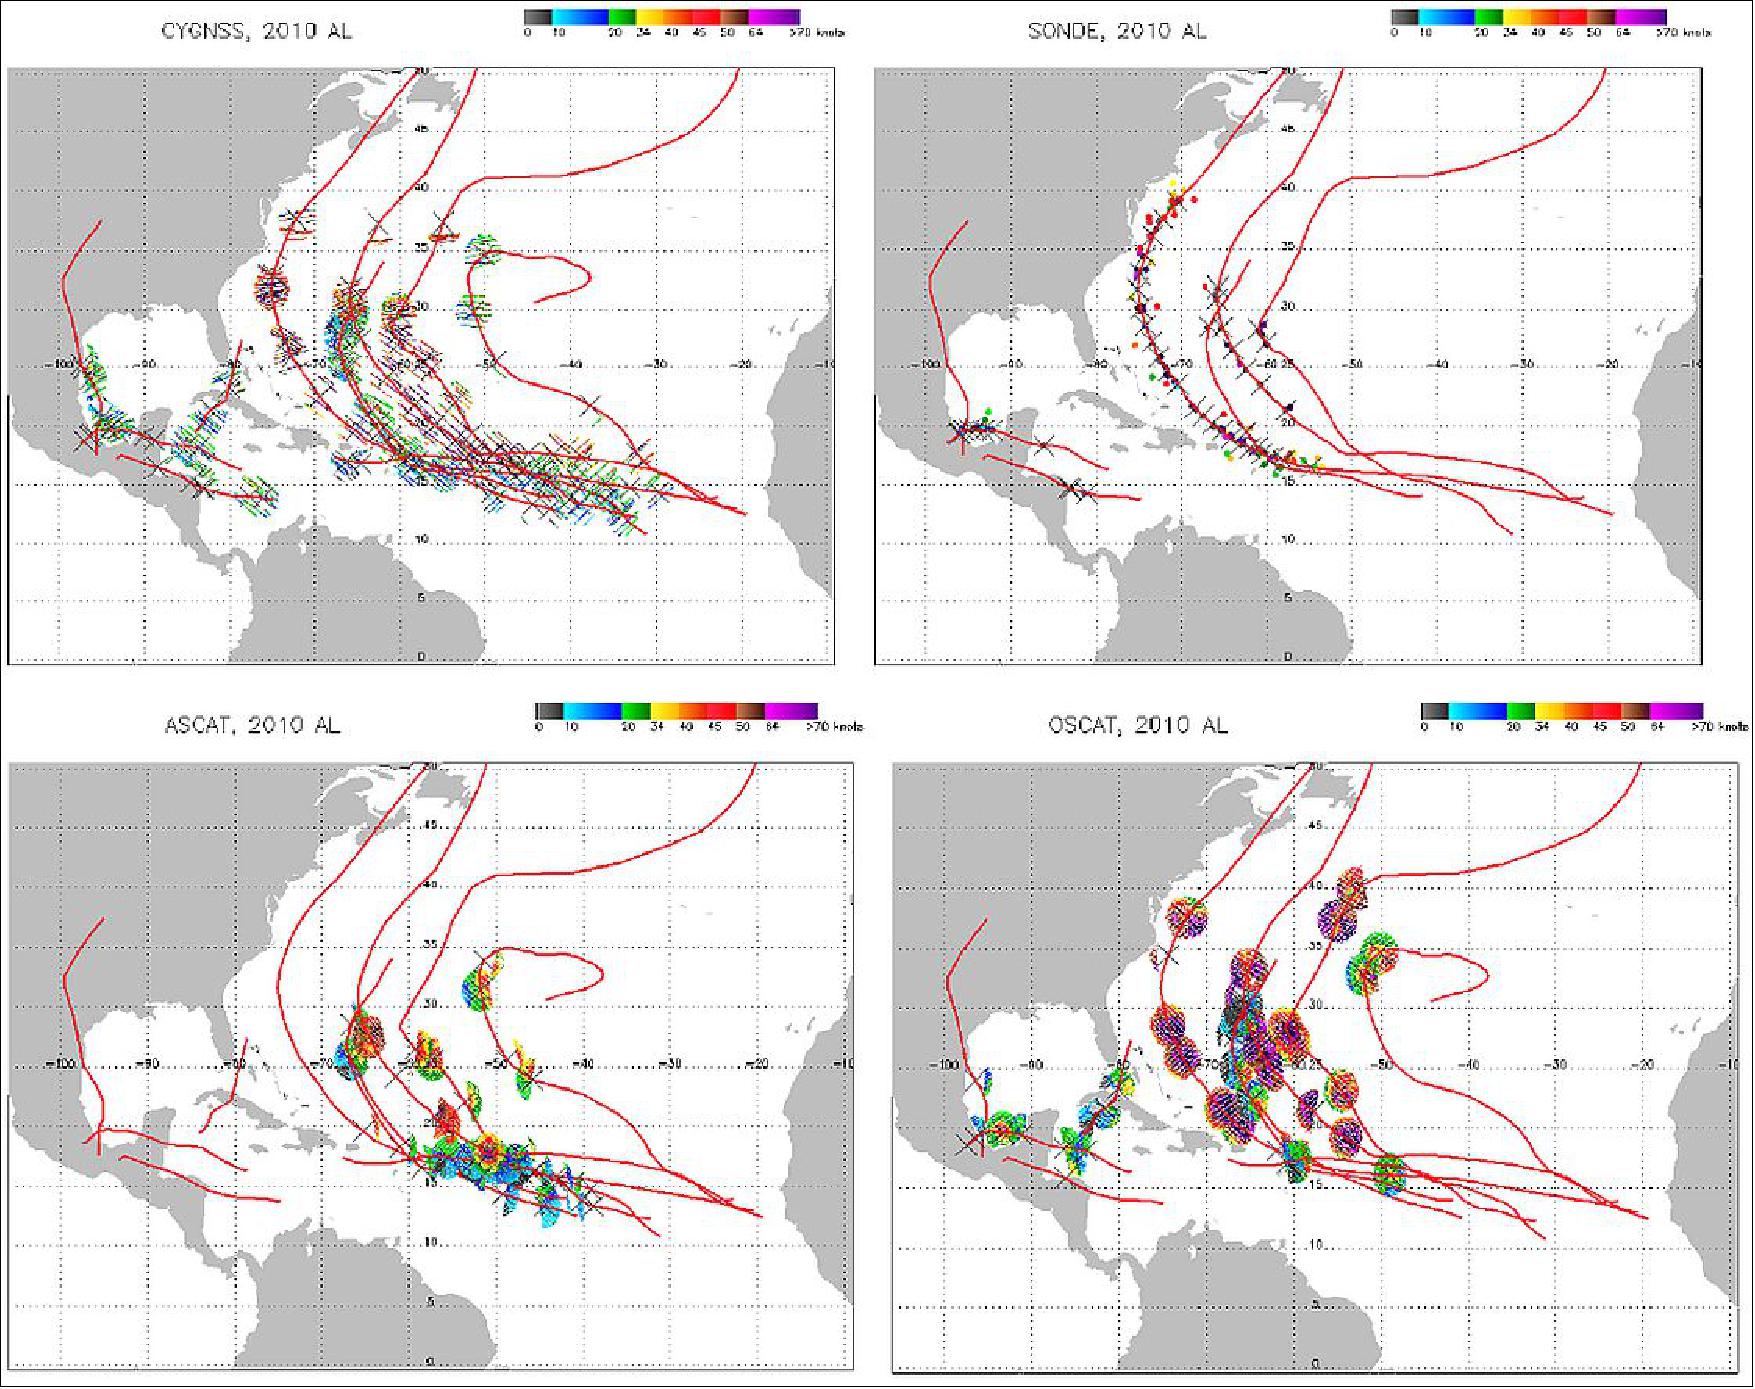 Figure 54: CYGNSS retrievals and corresponding "truth" data from OSCAT, ASCAT and GPS dropsondes for tropical cyclones during the 2010 season in the Atlantic basin (image credit: NOAA)